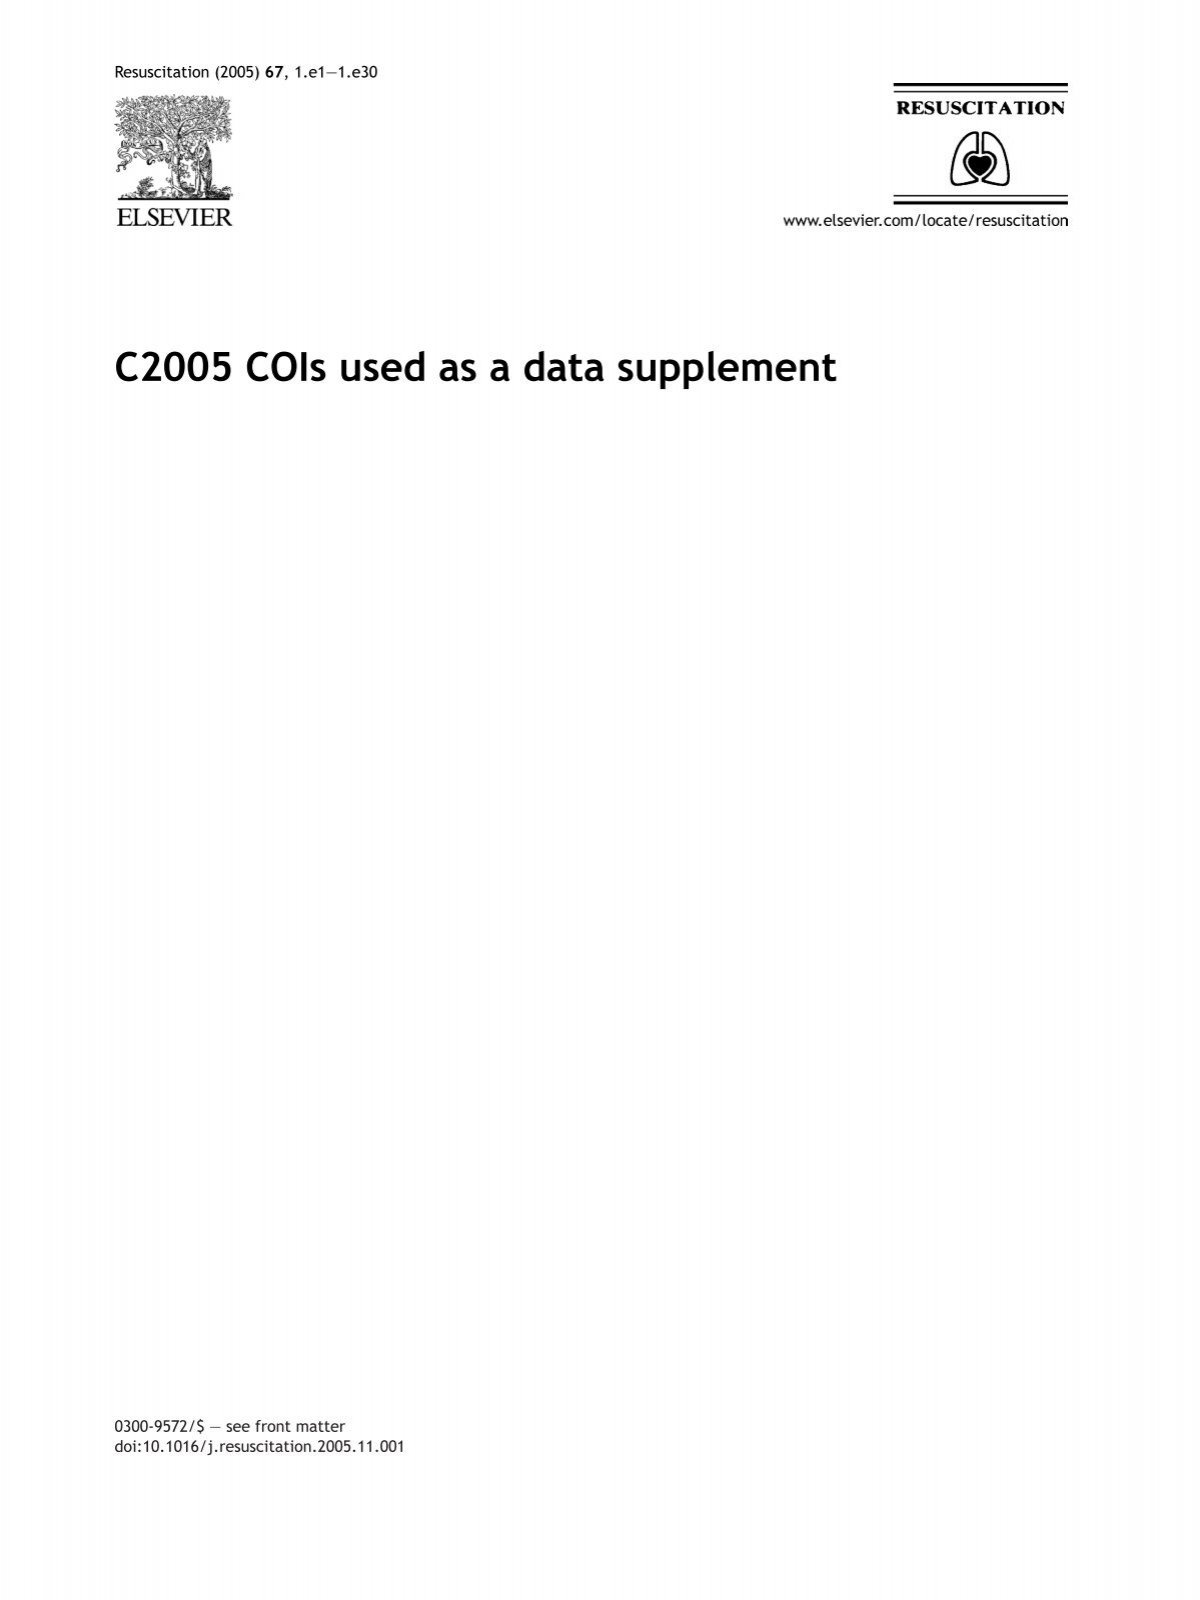 COIs used as a data supplement - Urgences-Online